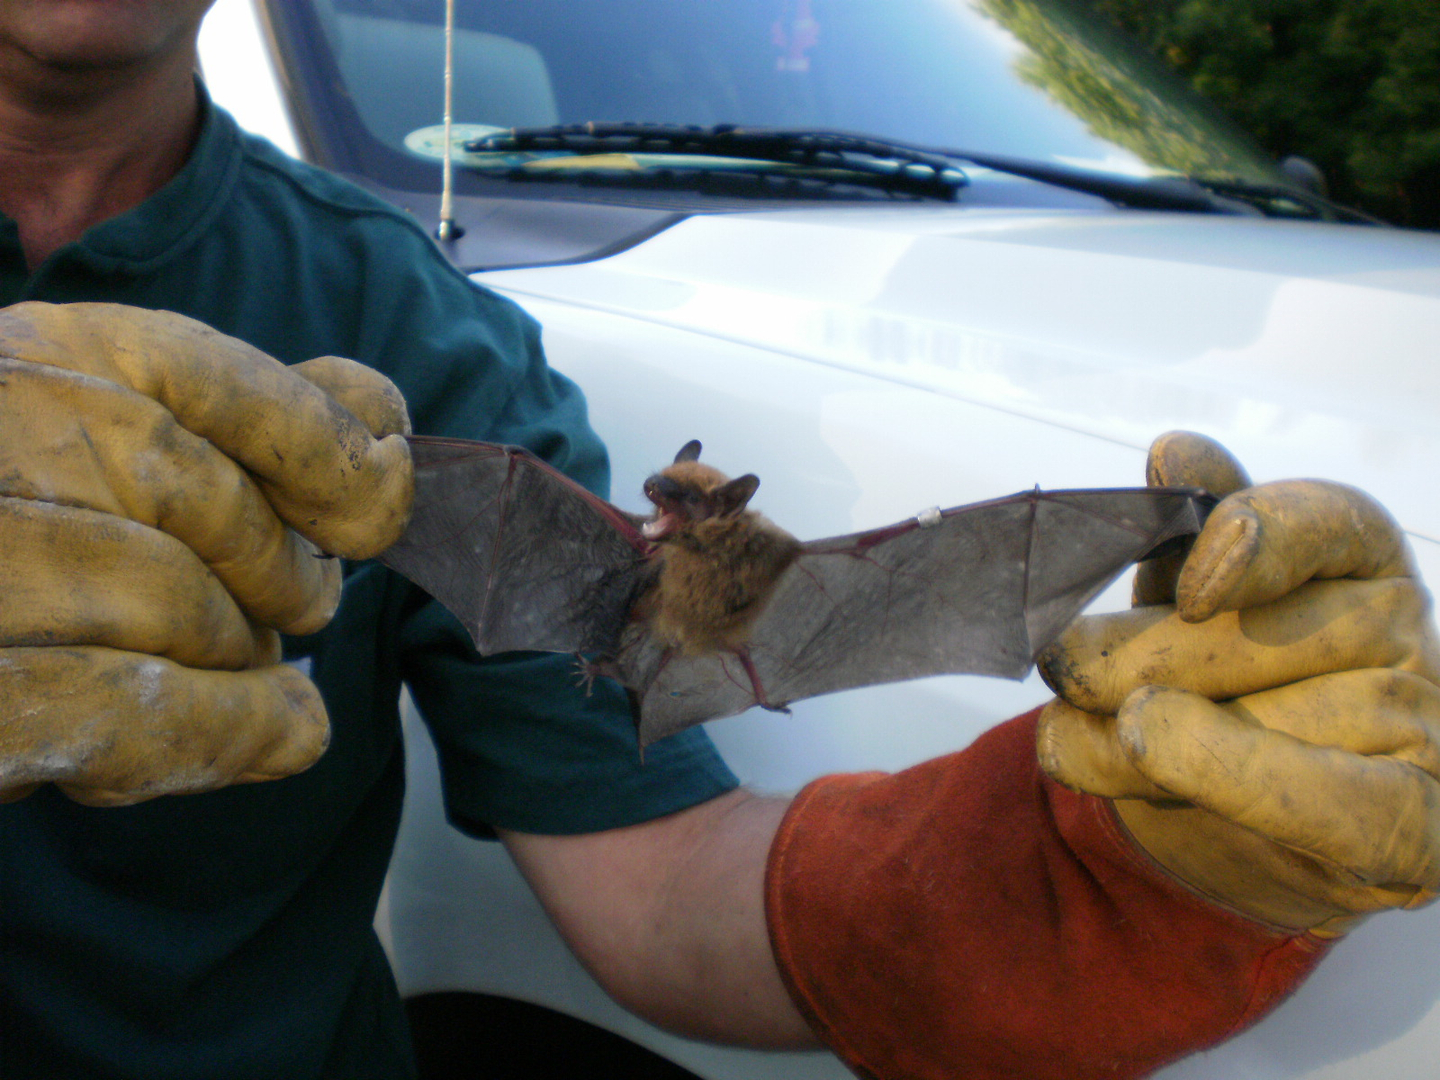 Bat captured and removed from home by Admiral Wildlife Services.